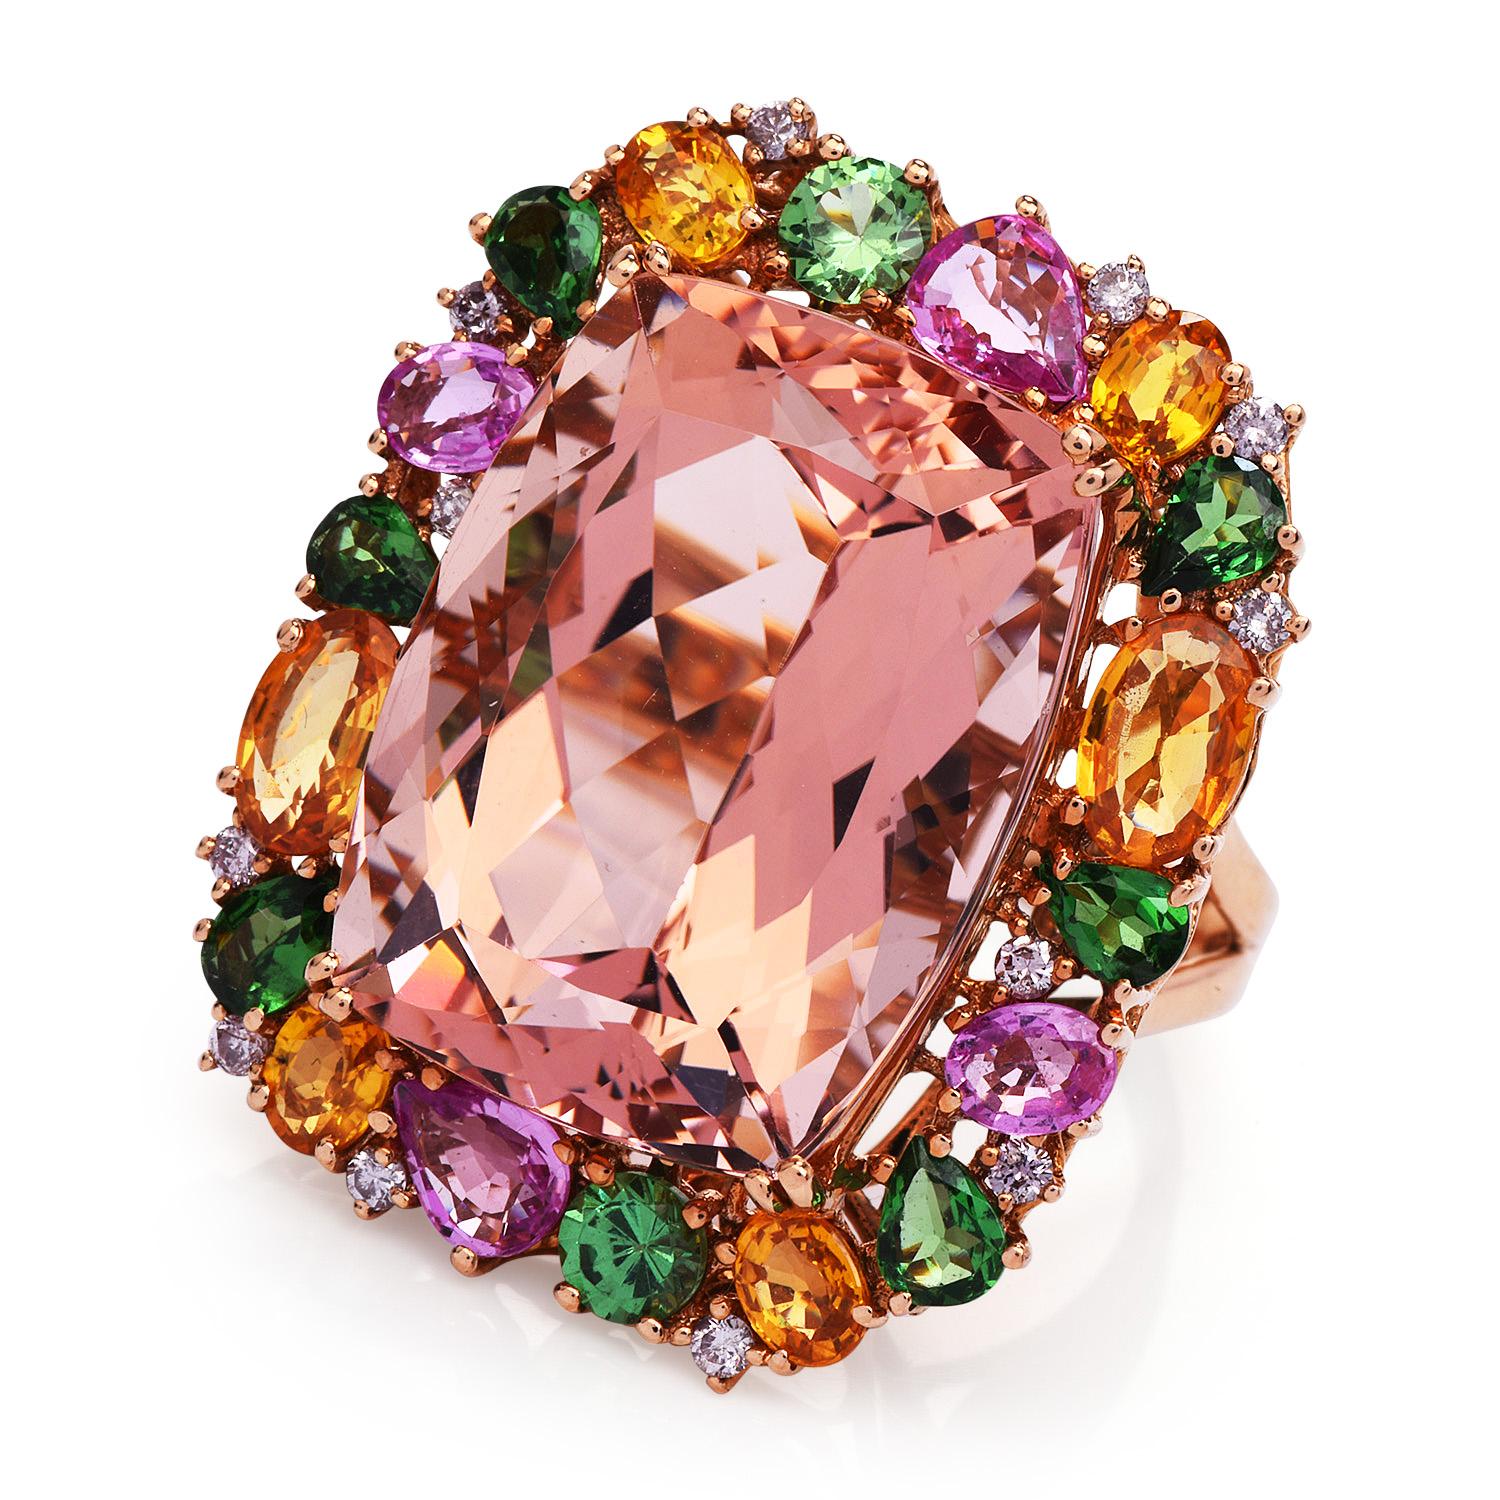 Bold and Beautiful! 

This colorful and playful cocktail ring was inspired by a Floral frame motif

and crafted in 12.0 grams of 18K rose gold.

The center features a GIA Certified Cushion Cut  Orangy Pink Morganite appx. 19.94 x 15.25 x 11.07 mm,